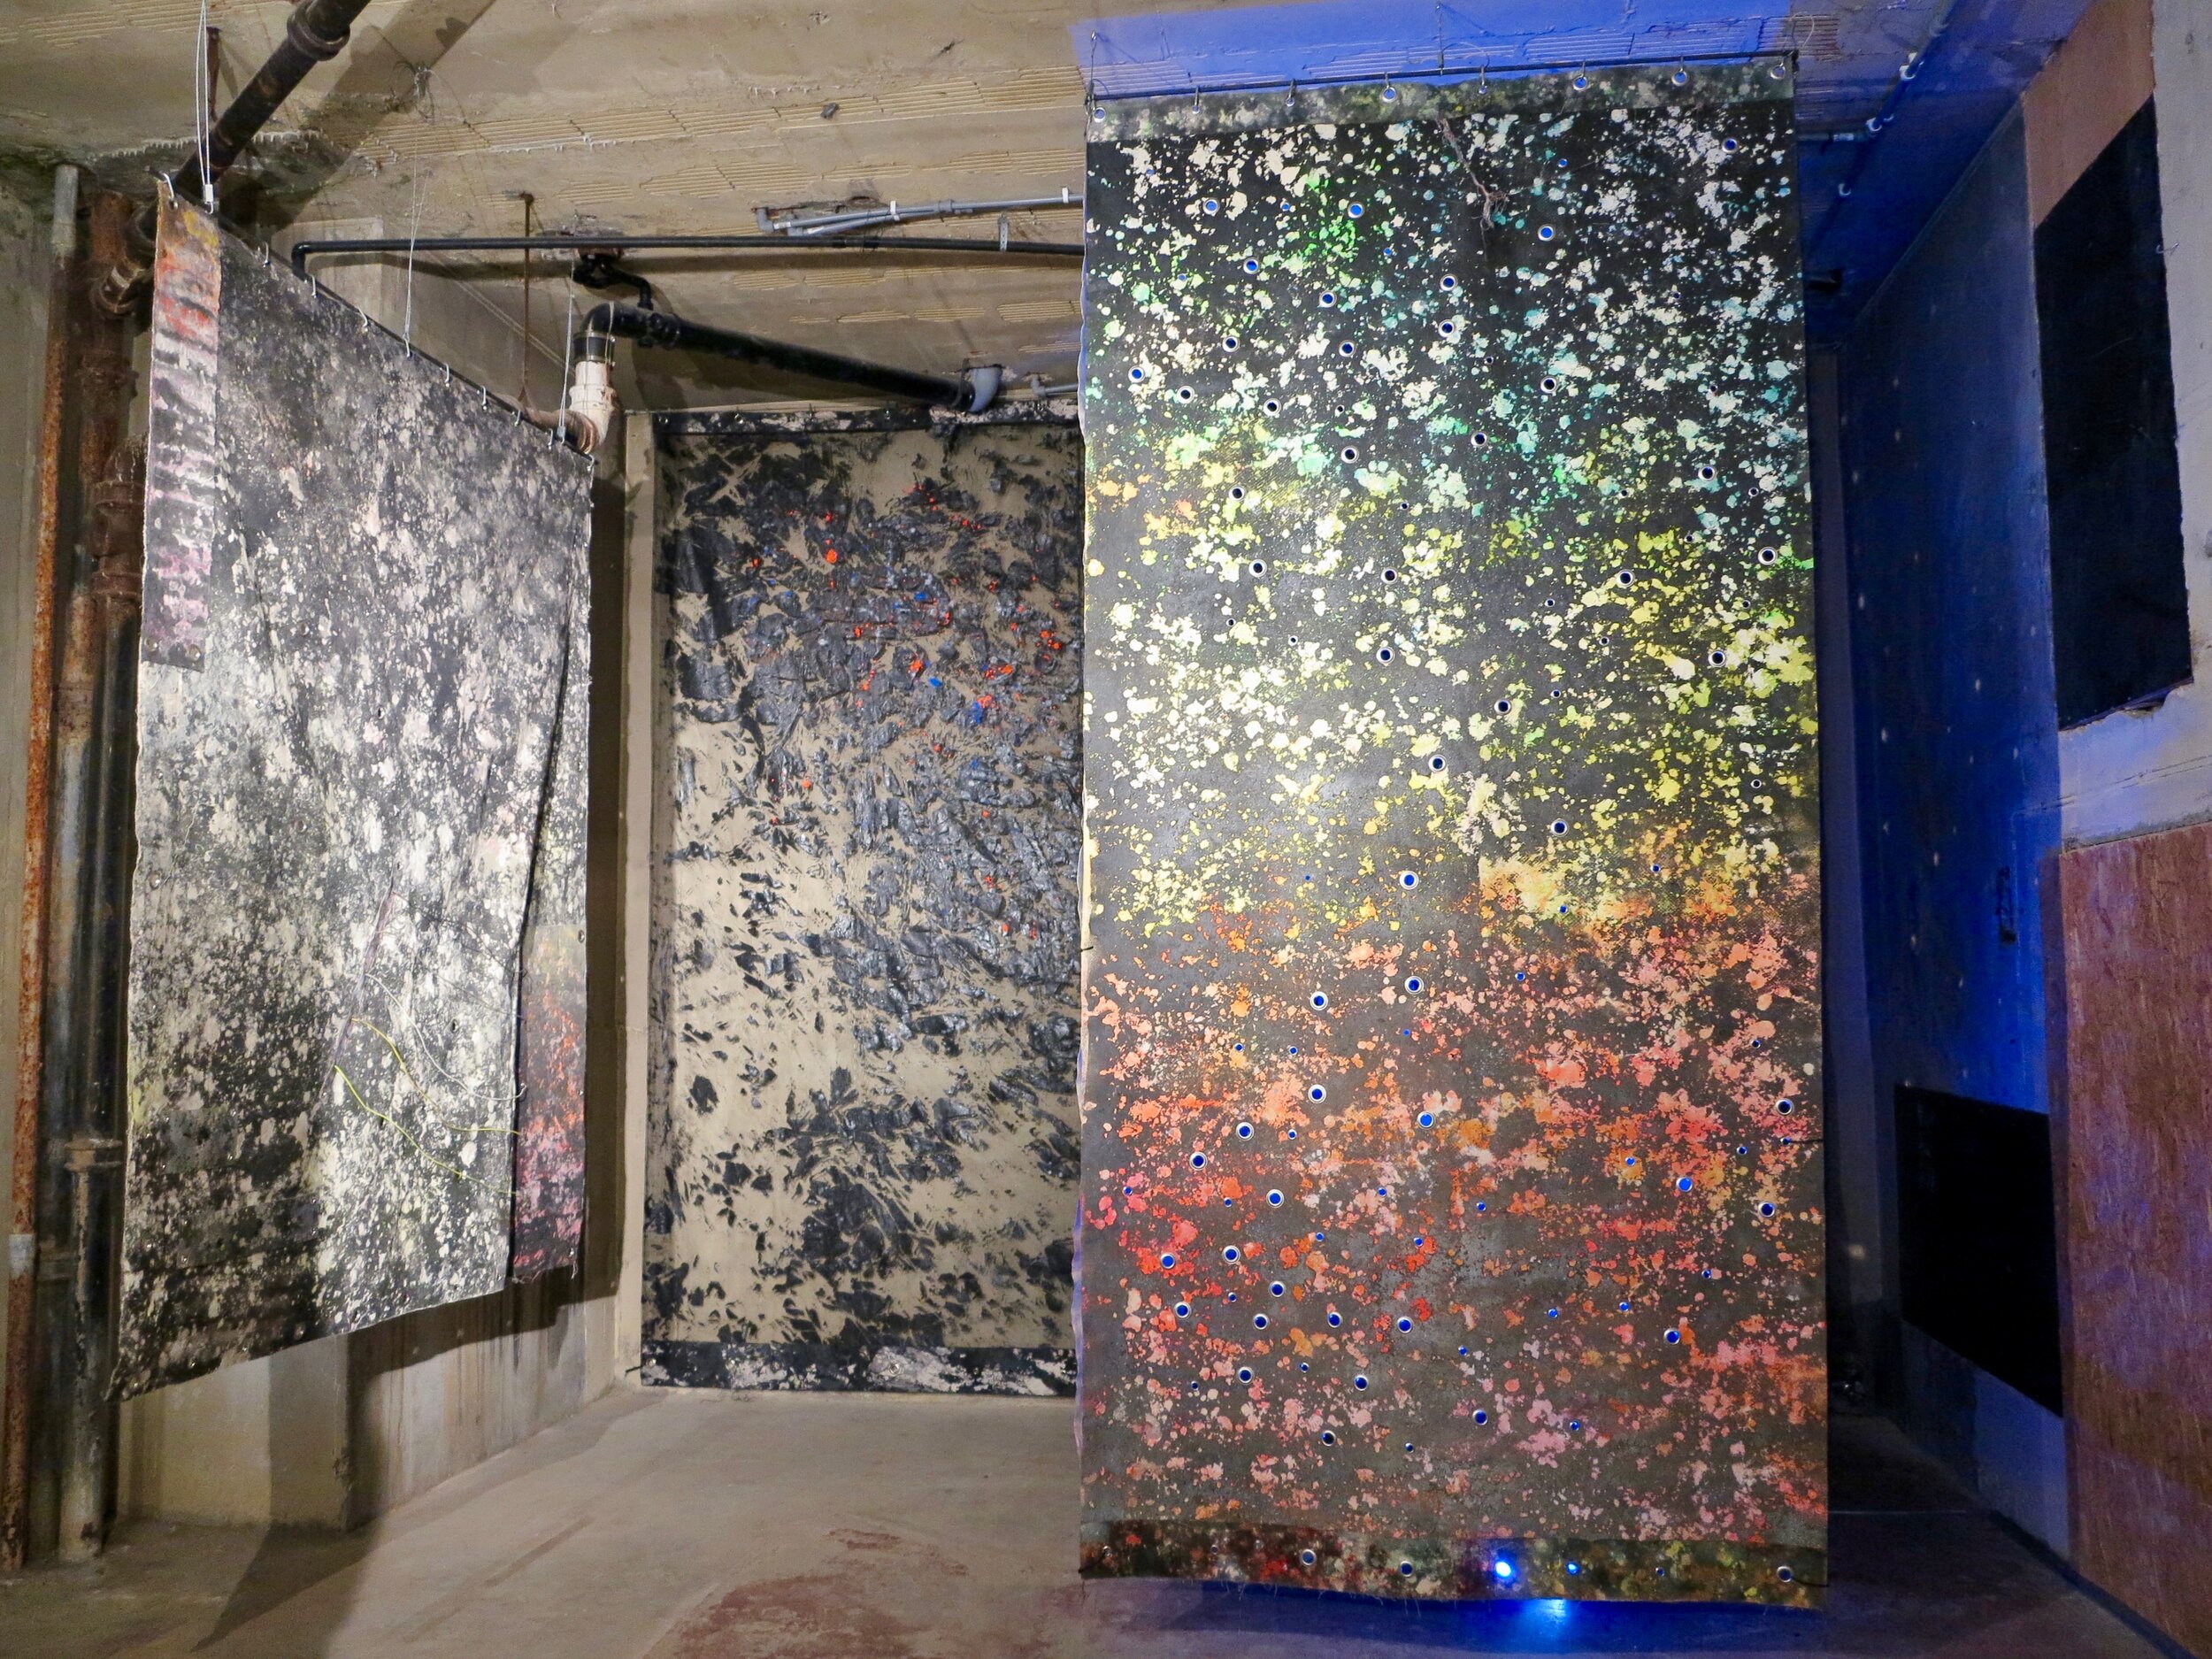   Sugar Mountain  installation view.  Alkyd resin, sand, brass, rubber, polyethylene, canvas and steel.  410 x 480 x 460 cm.  The Silver Building, London 2019. 